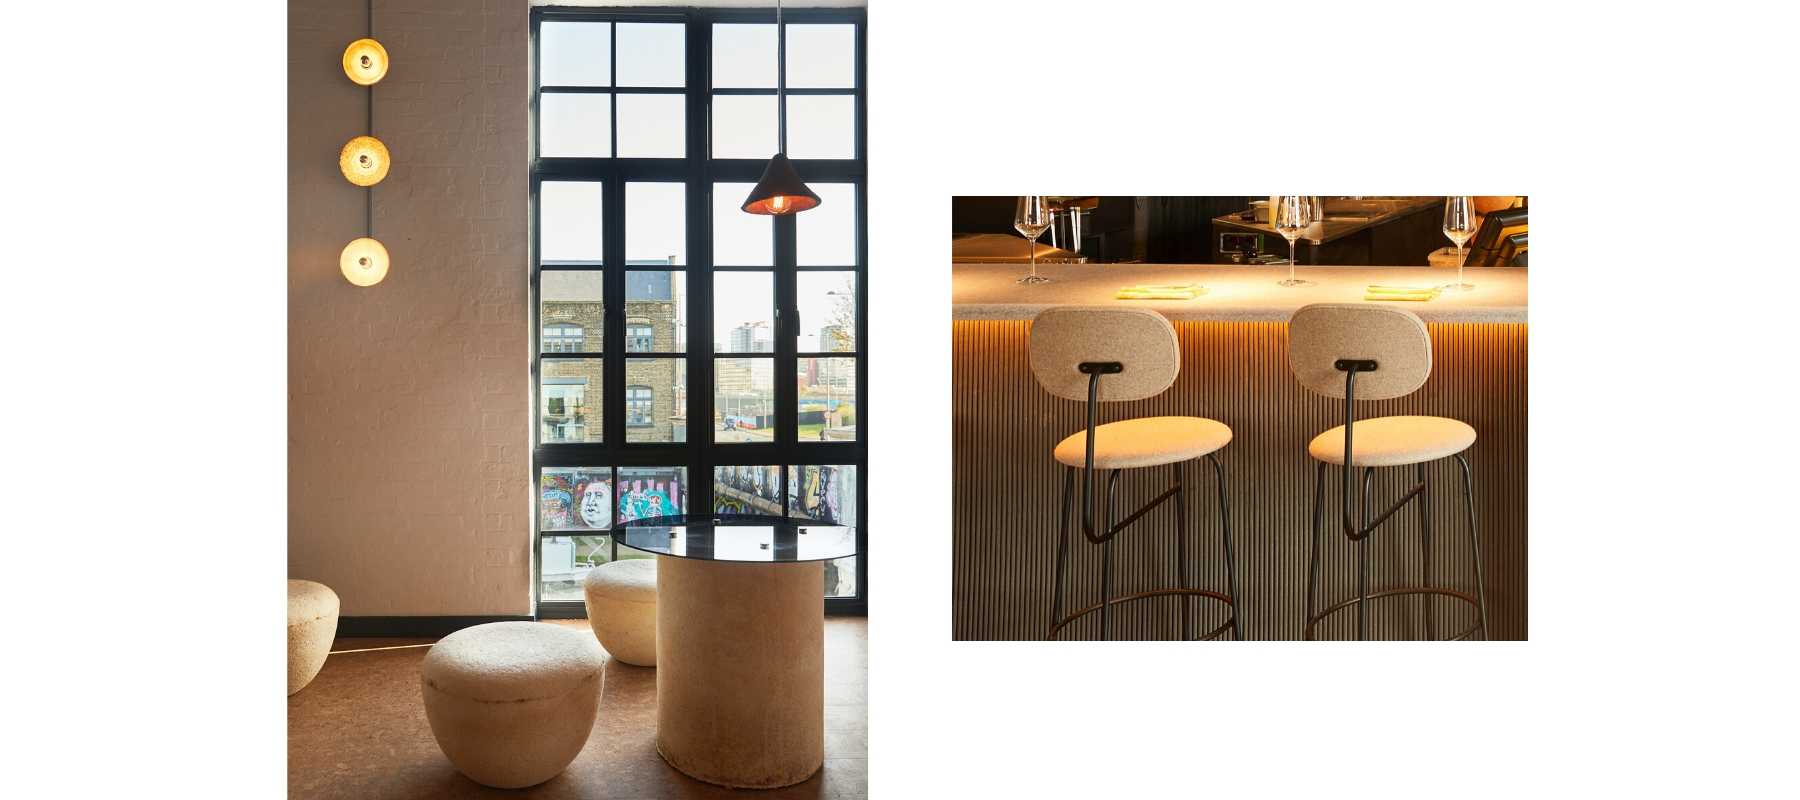 Cream bar stools in front of large industrial window and bar stools at bar